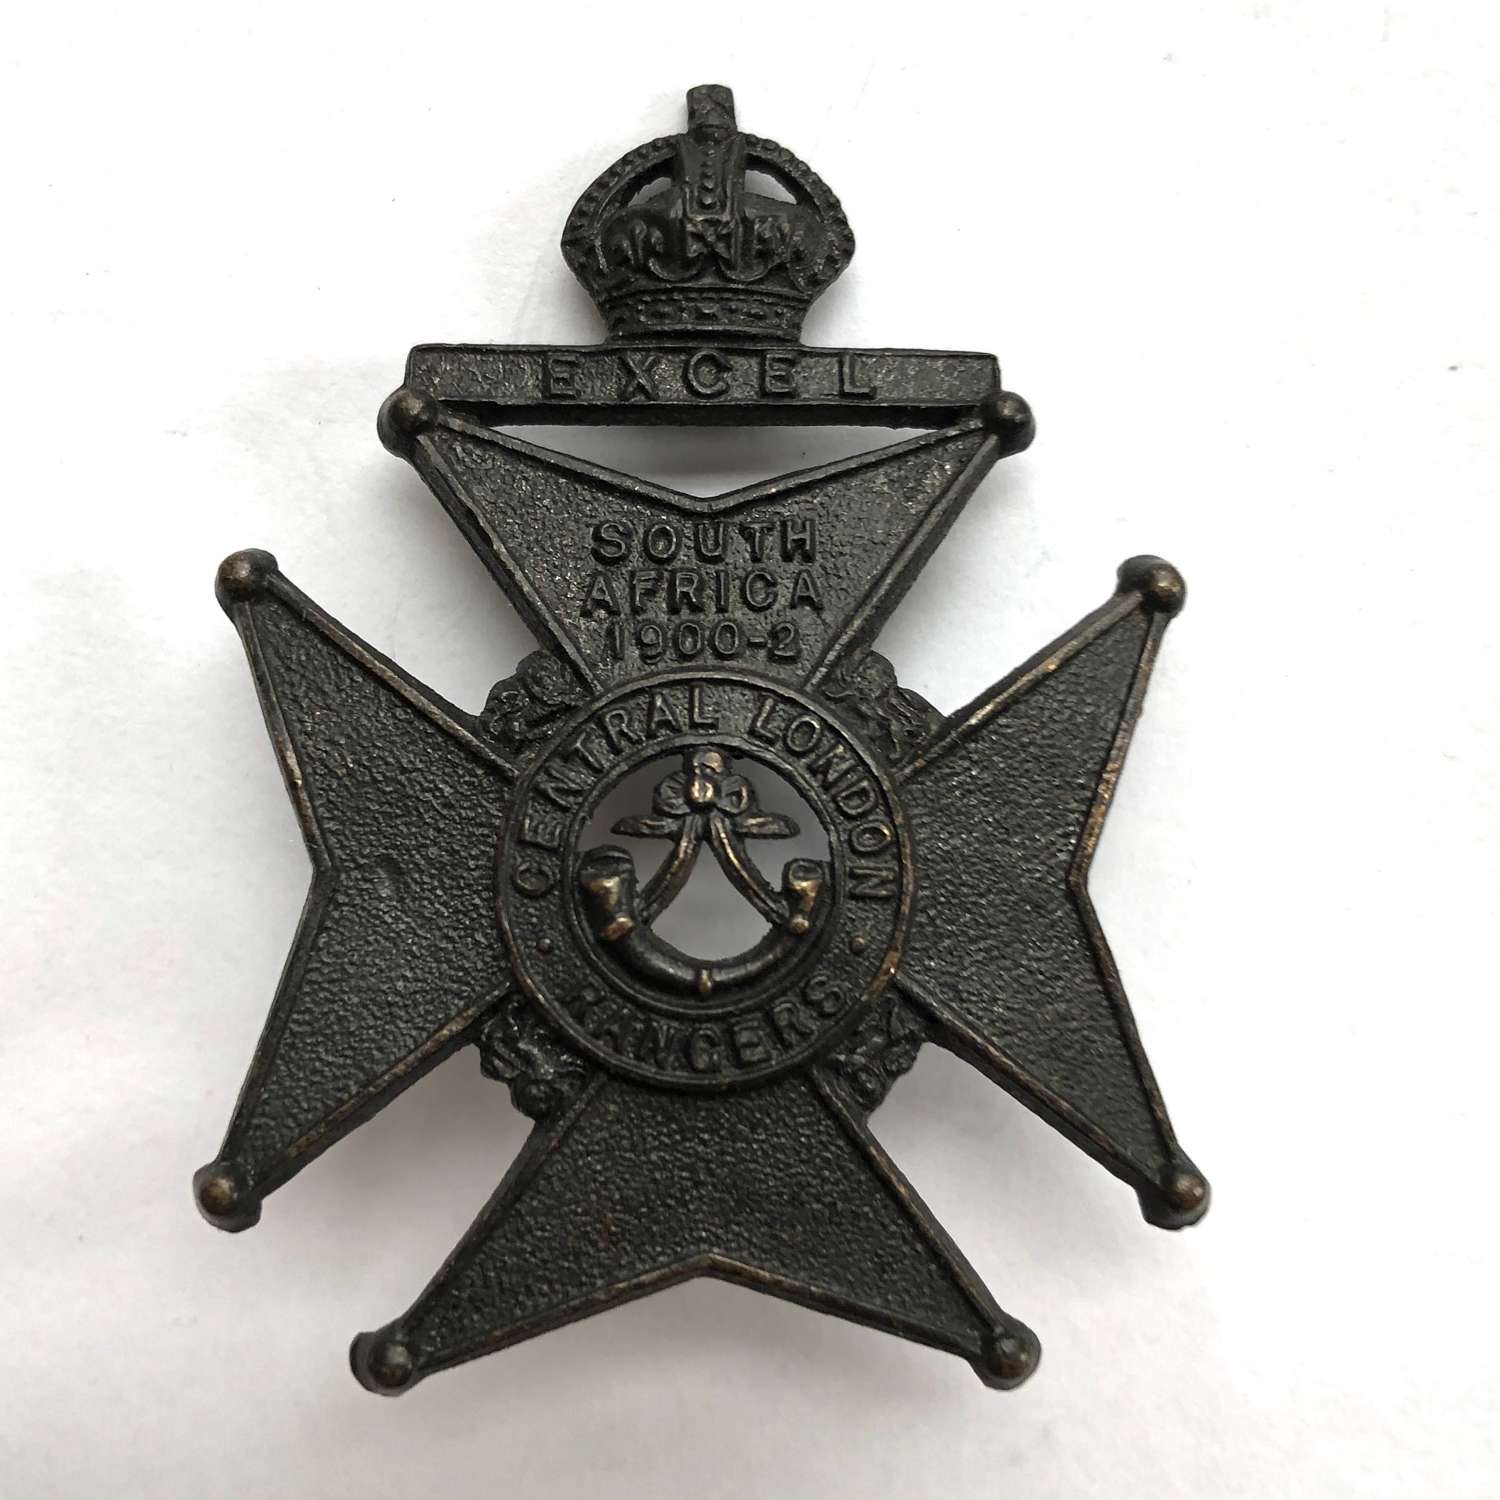 22nd Middlesex, Central London Rangers cap badge circa 1905-08 only